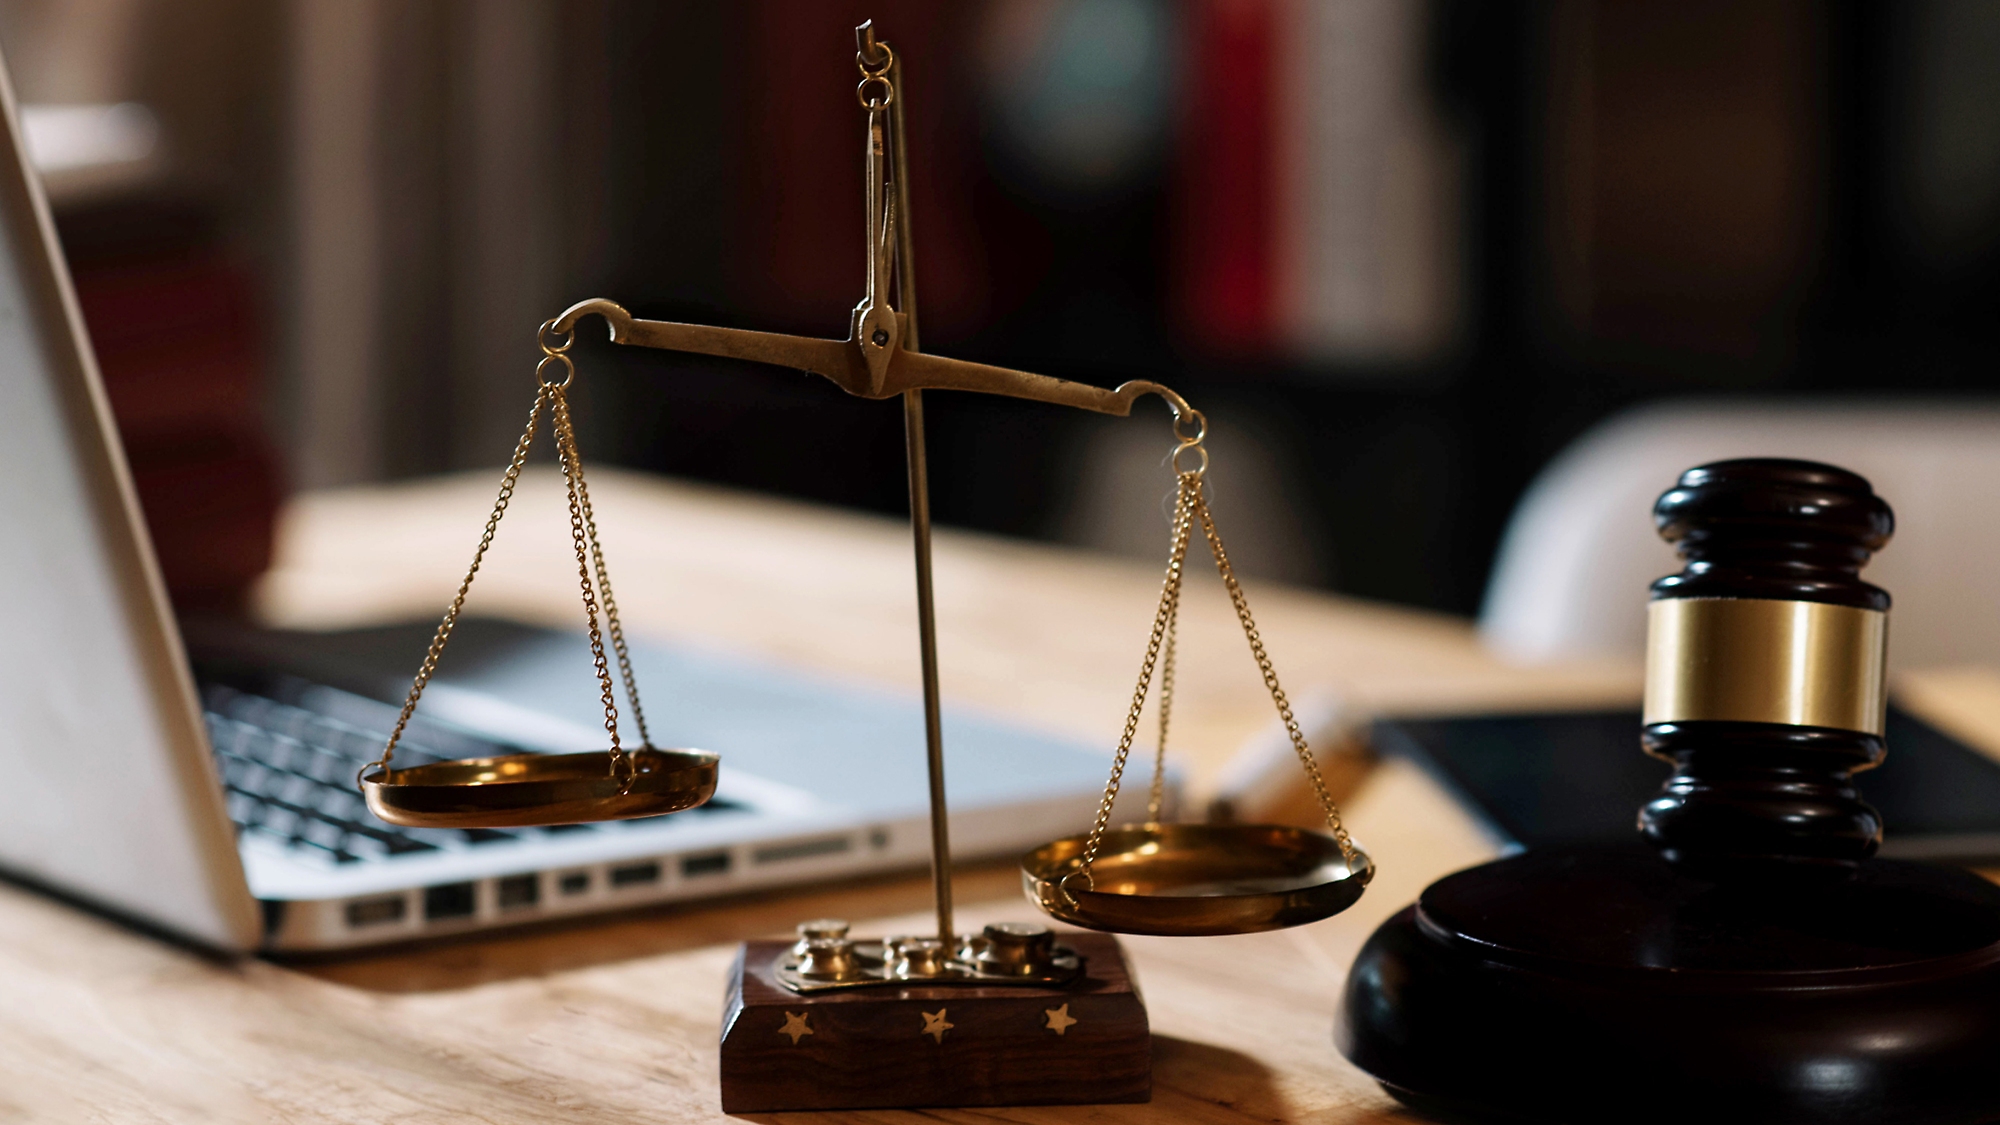 A wooden gavel and a set of scales on a desk, with a laptop in the background, symbolizing legal practice in an office setting.